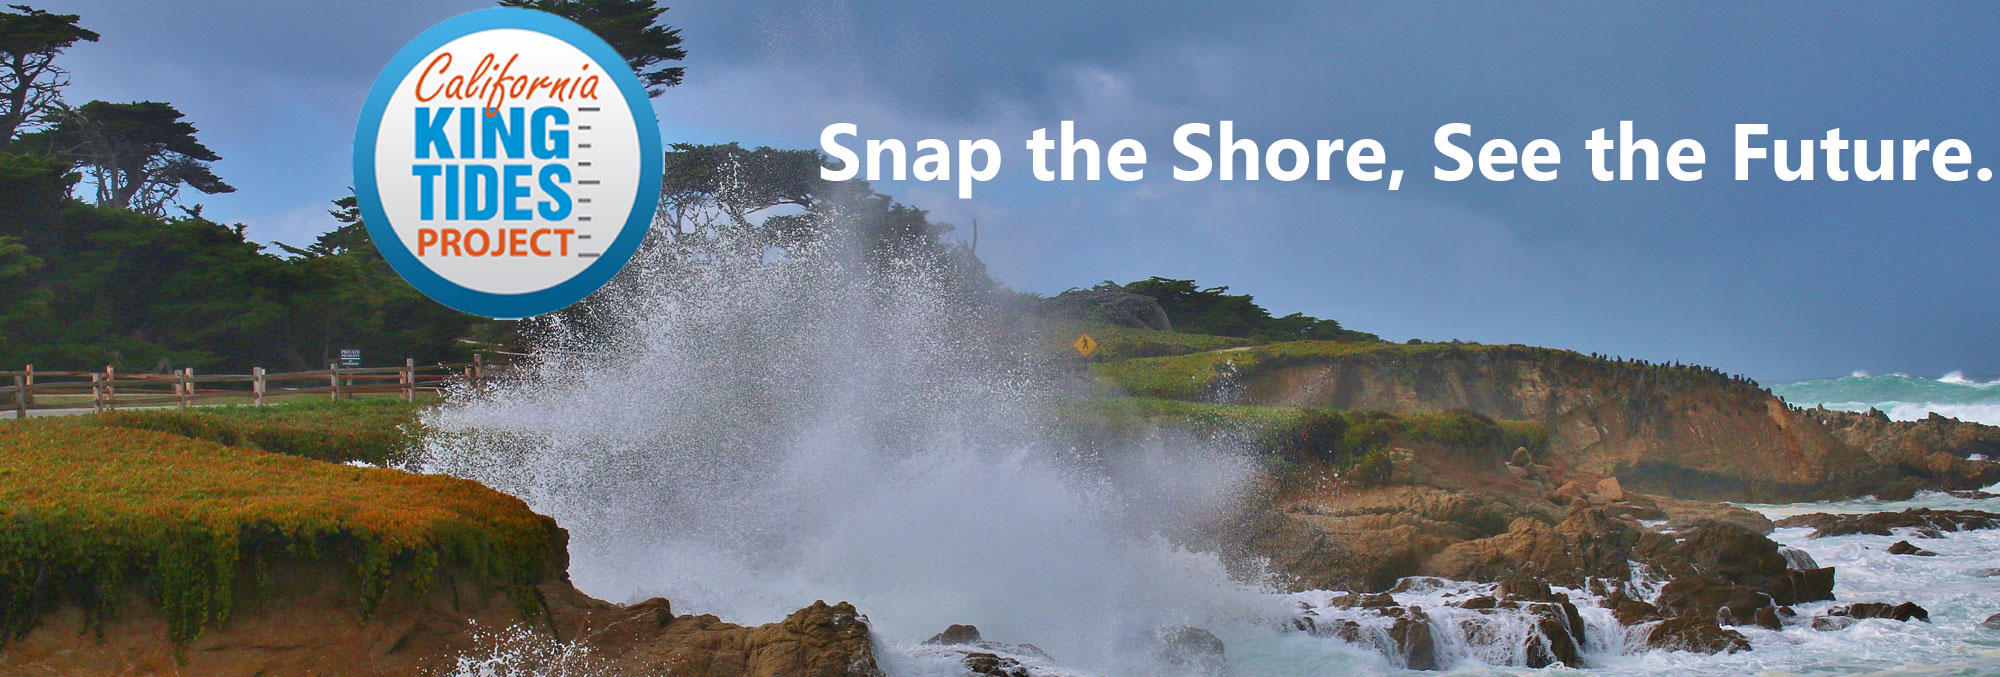 California King Tides Project. Snap the Shore, See the Future. Waves splash at Cypress Point, Pacific Grove